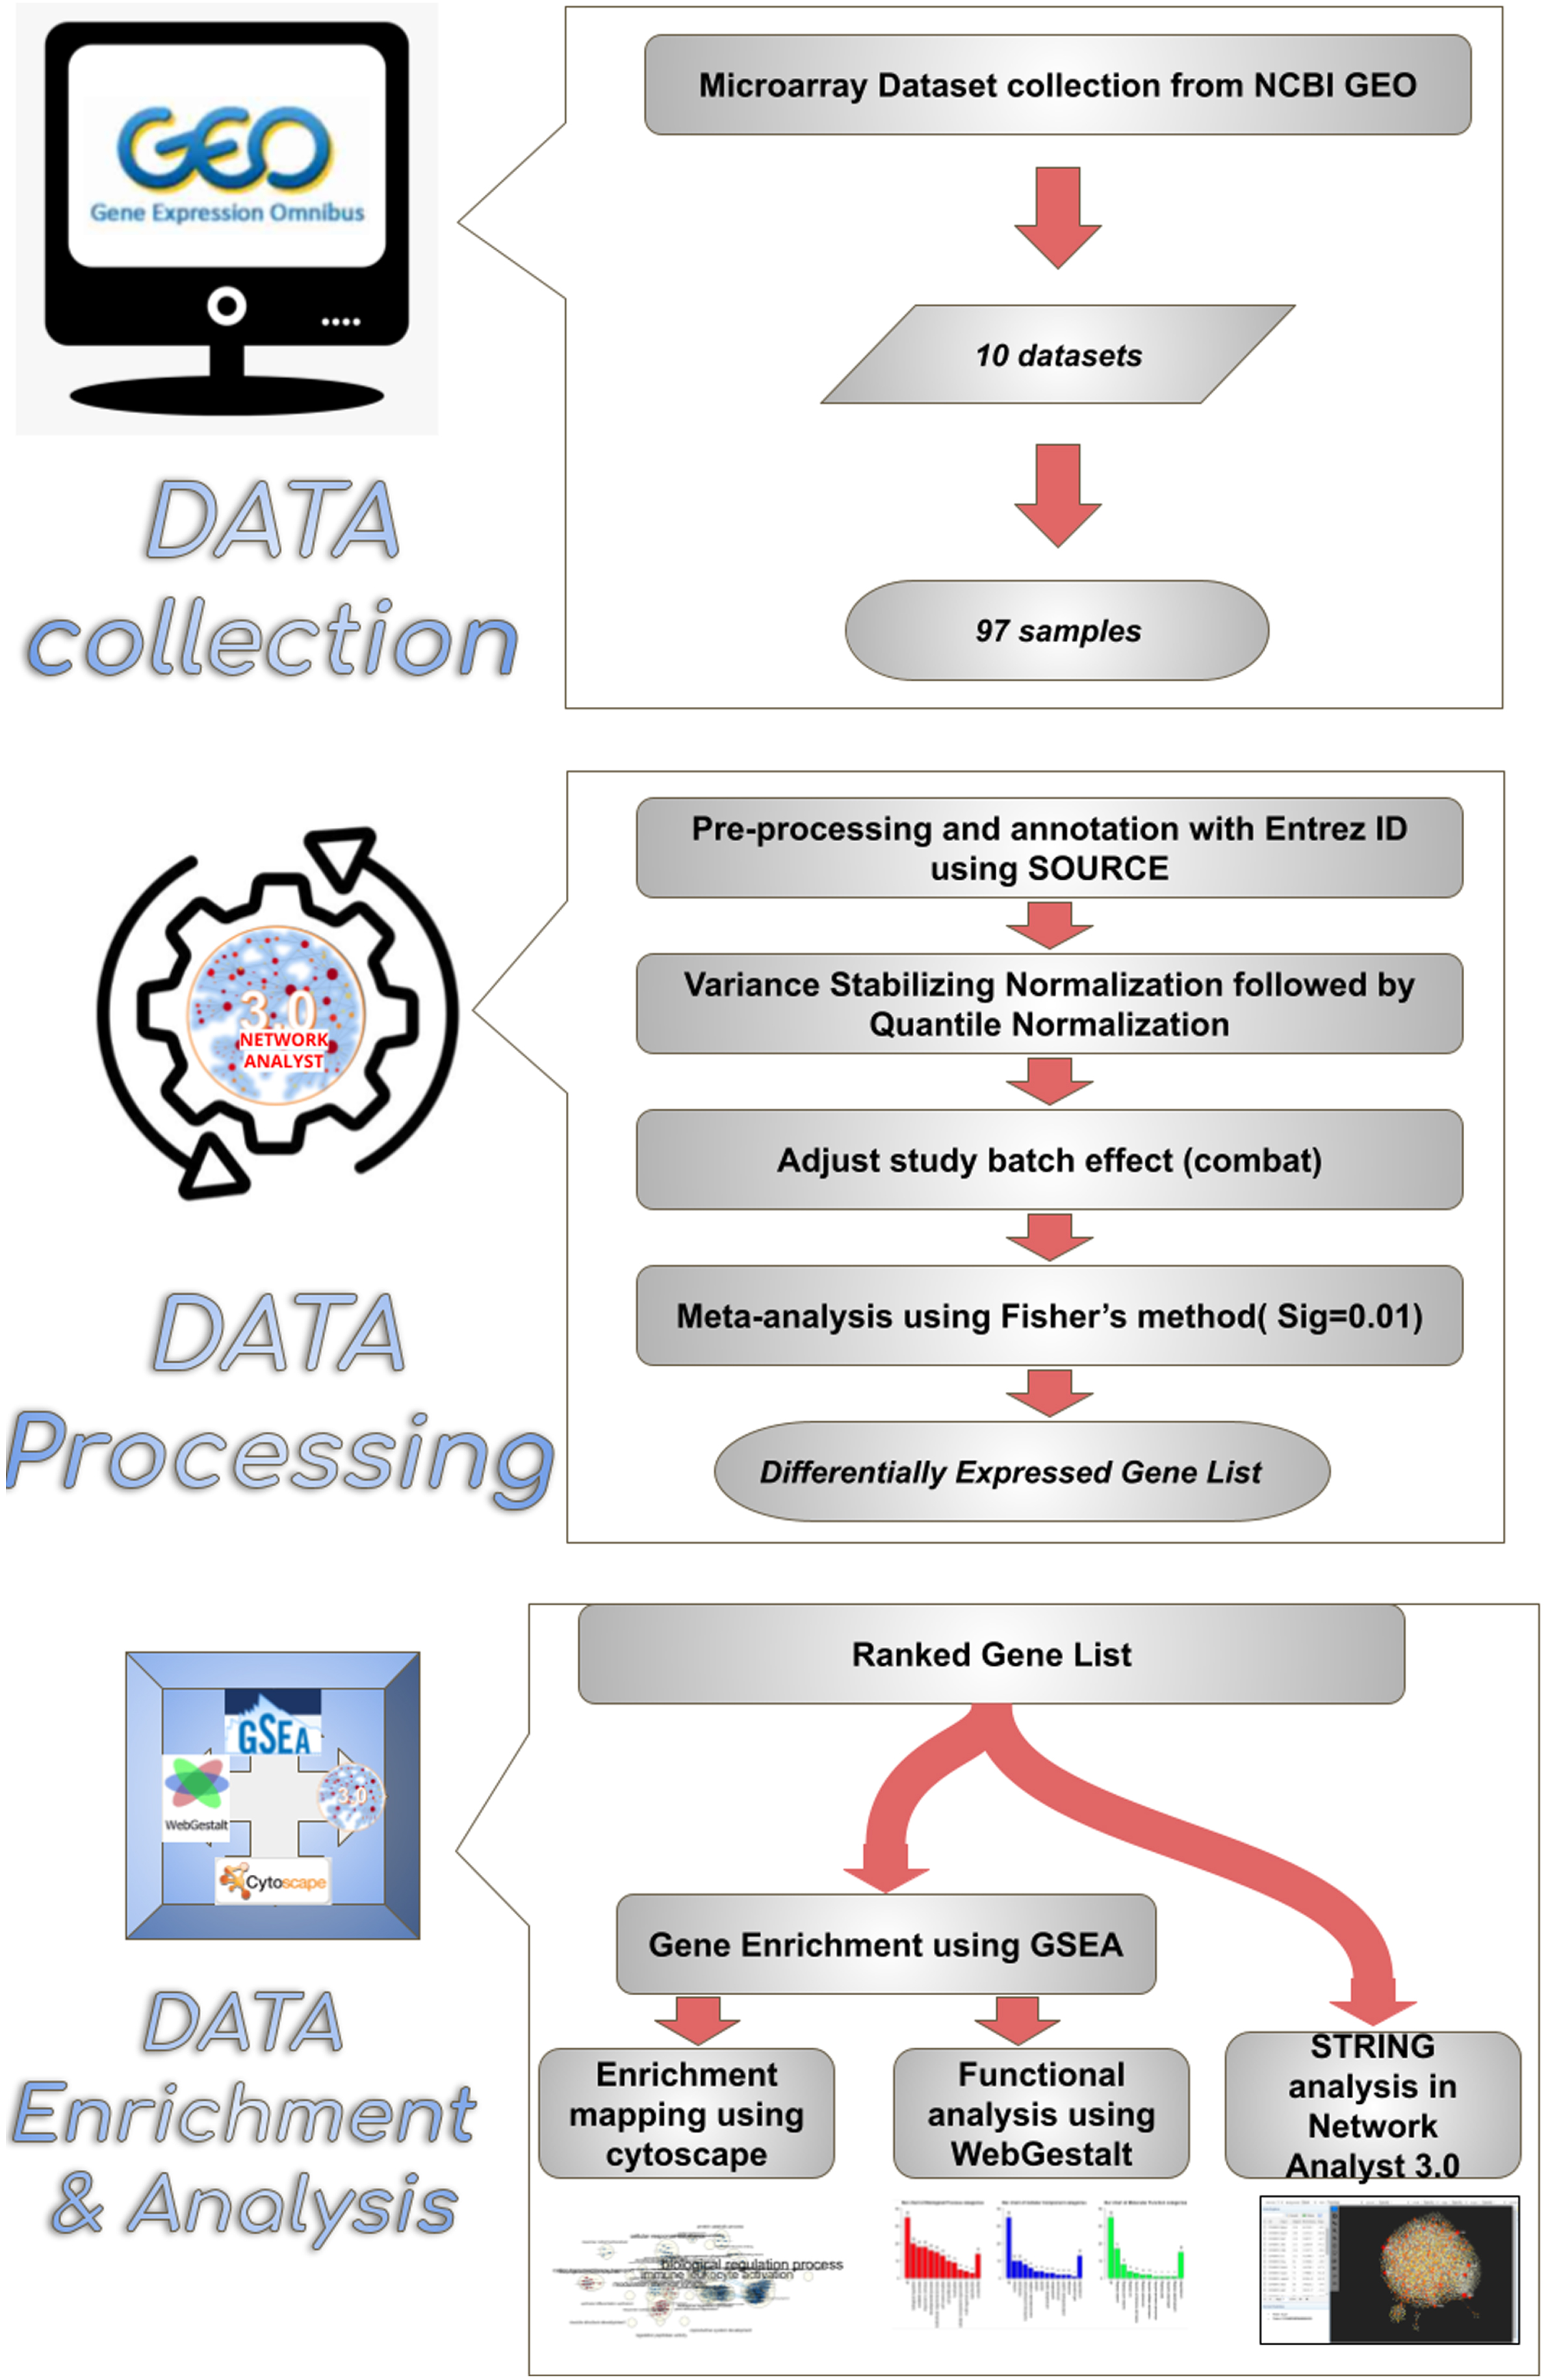 Overview of the enrichment analysis process. Synopsis of a meta-analysis conducted in this study. 10 microarray datasets comprising a total of 97 samples were chosen from the NCBI GEO webpage. Datasets were annotated with Entrez id to facilitate compatibility in network analyst 3.0 software. After validation, the data were uploaded to Network analyst software, where the samples were normalized and subjected to meta-analysis, thus obtaining the resulting ranked differentially expressed gene list comprising 939 genes. The differentially expressed genes between sham and MCAo stroke-affected animals were subjected to enrichment analysis through Cytoscape, WebGestalt and string analysis.